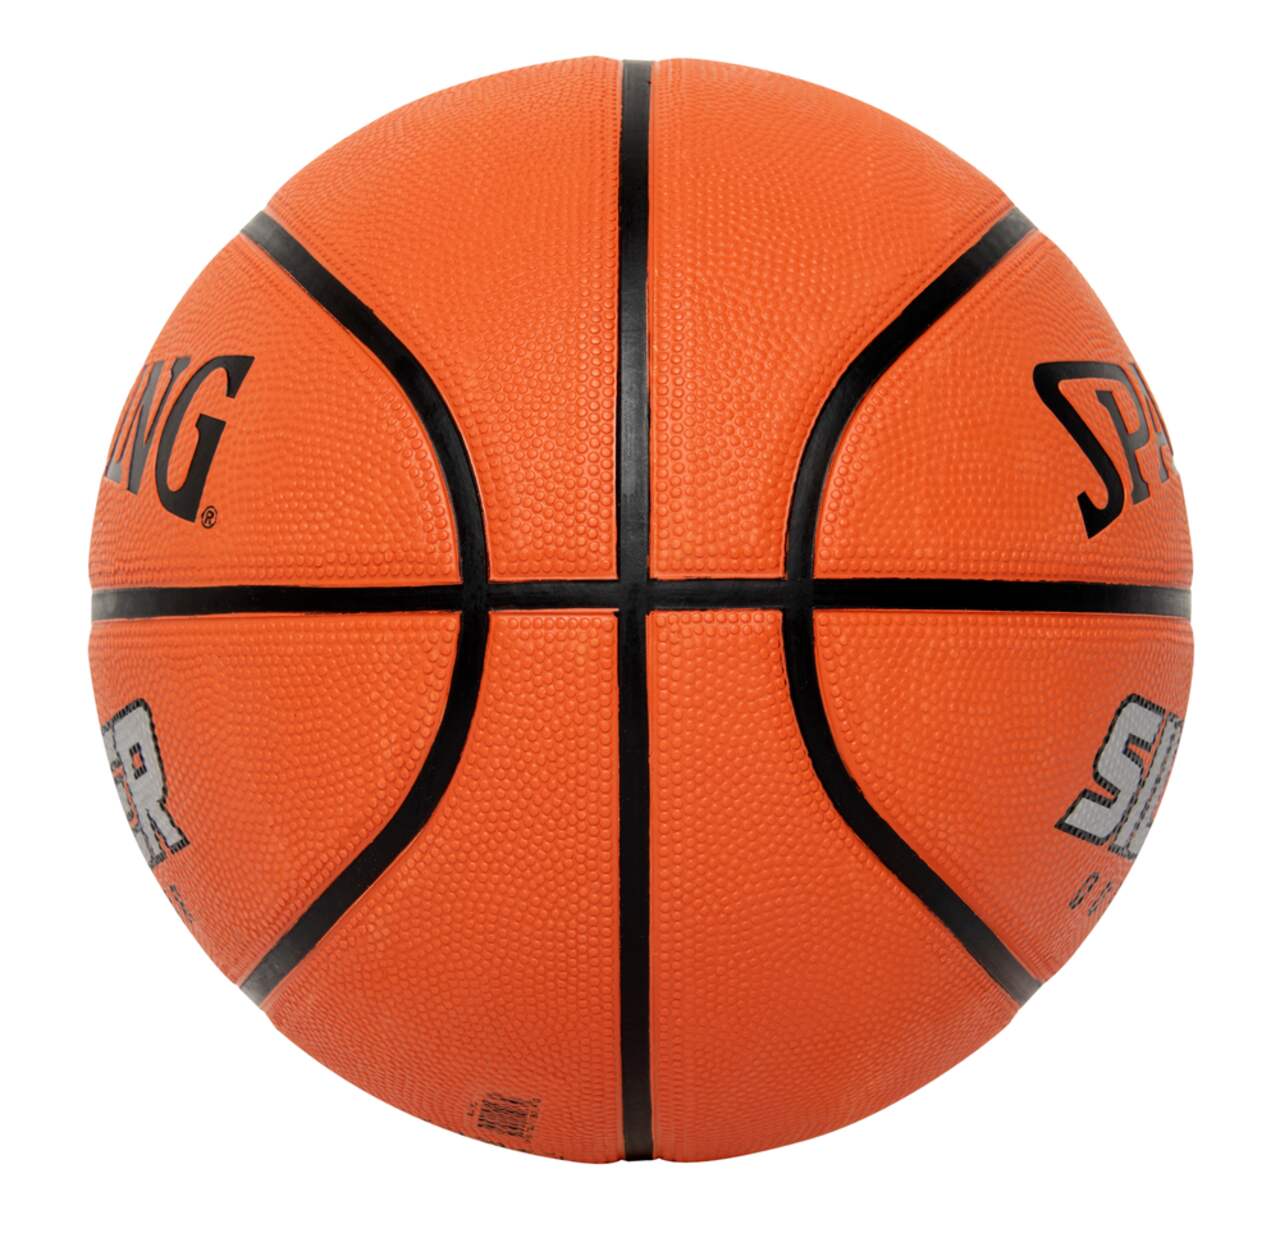 Canadian 7 (29.5-in) Size Official Basketball, Rubber Outdoor Tire Spalding | Silver